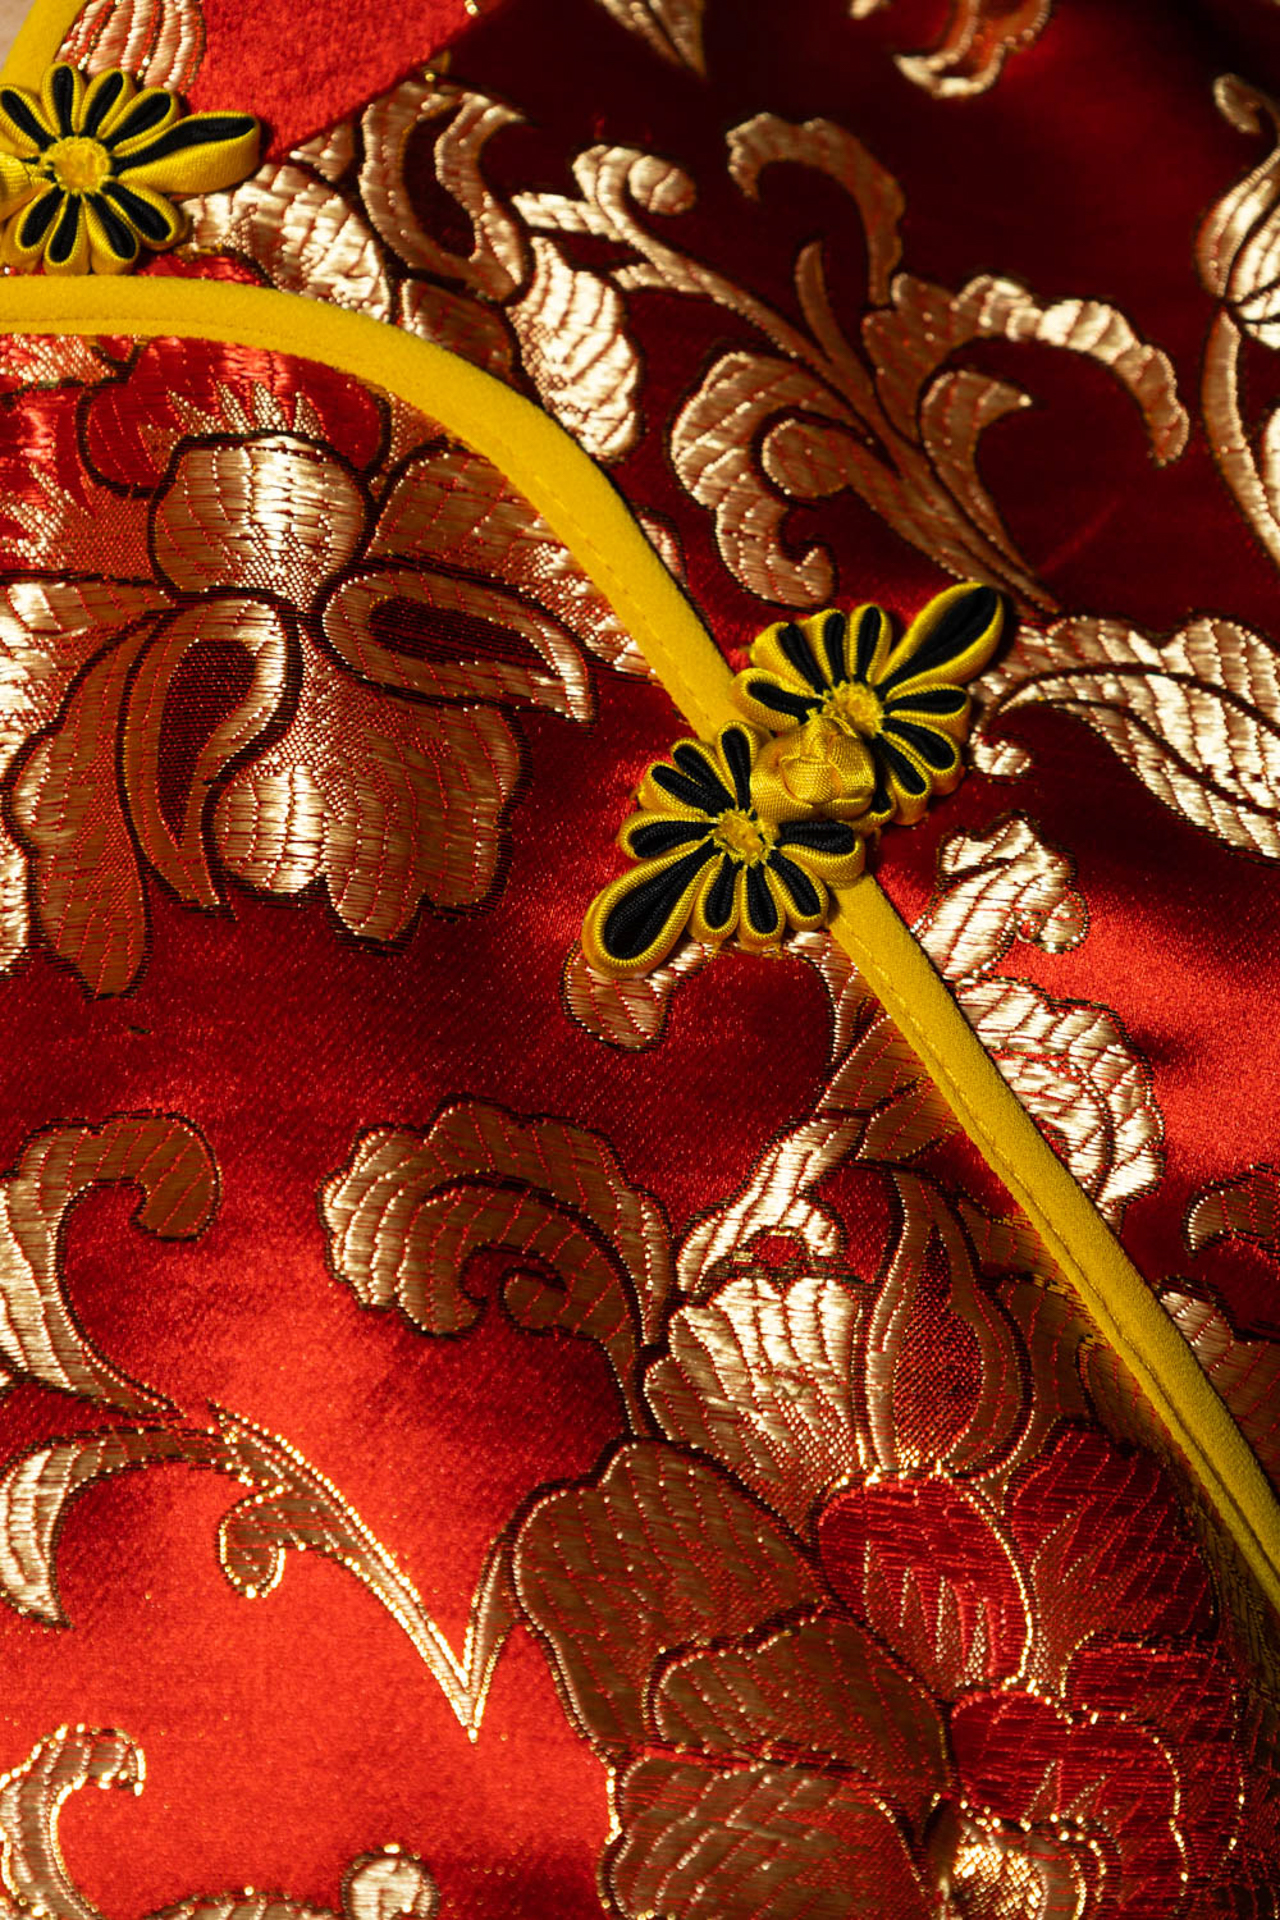 A detailed shot of traditional red qipao, there are various embellishments and embroidery featured throughout the photograph. The embroidery on the garment is shiny and catches your eye.